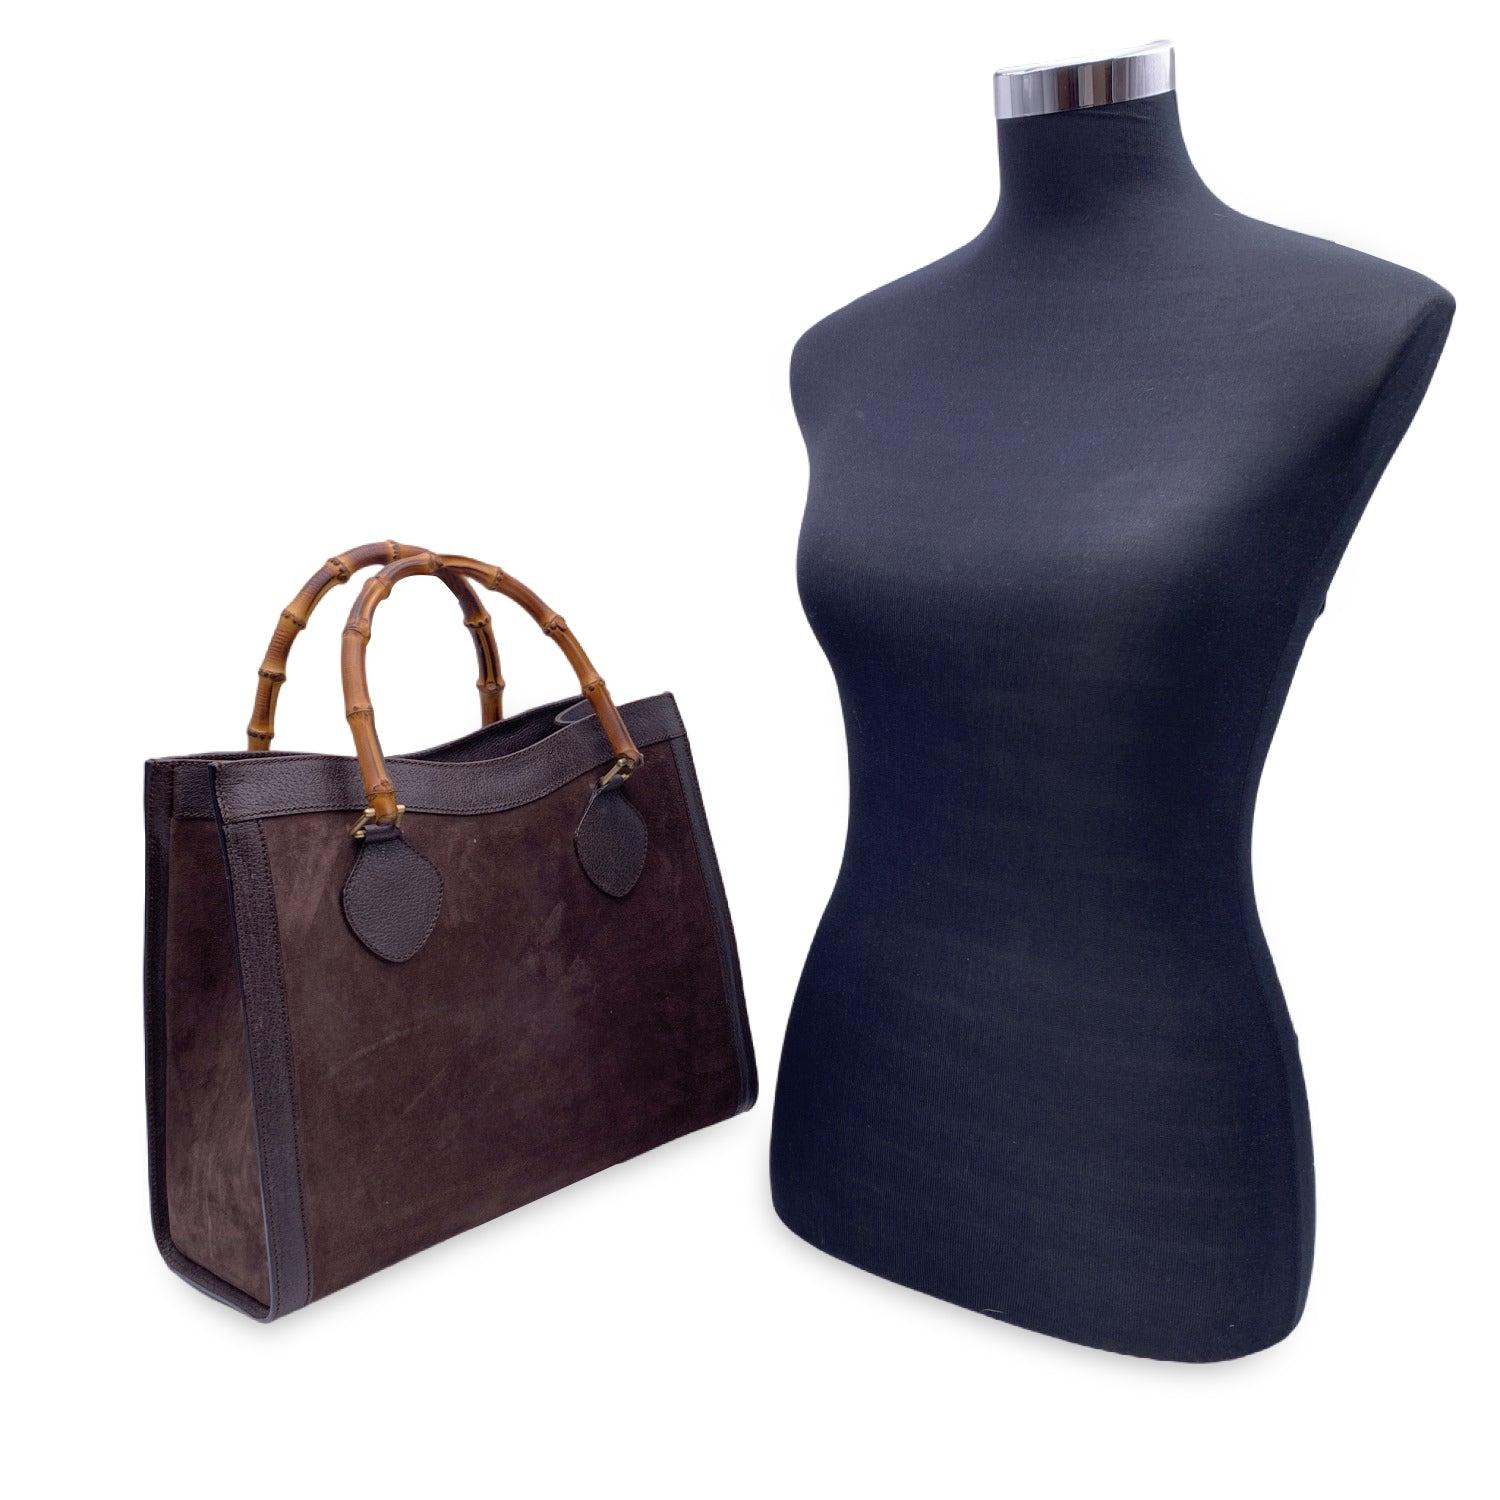 Beautiful Gucci Bamboo tote bag in brown suede and leather. Double distinctive Bamboo handle. Princess Diana, was snapped carrying a this model on several occasions. Magnetic button closure on top. 5 bottom feet. Gold metal hardware. 1 Zip